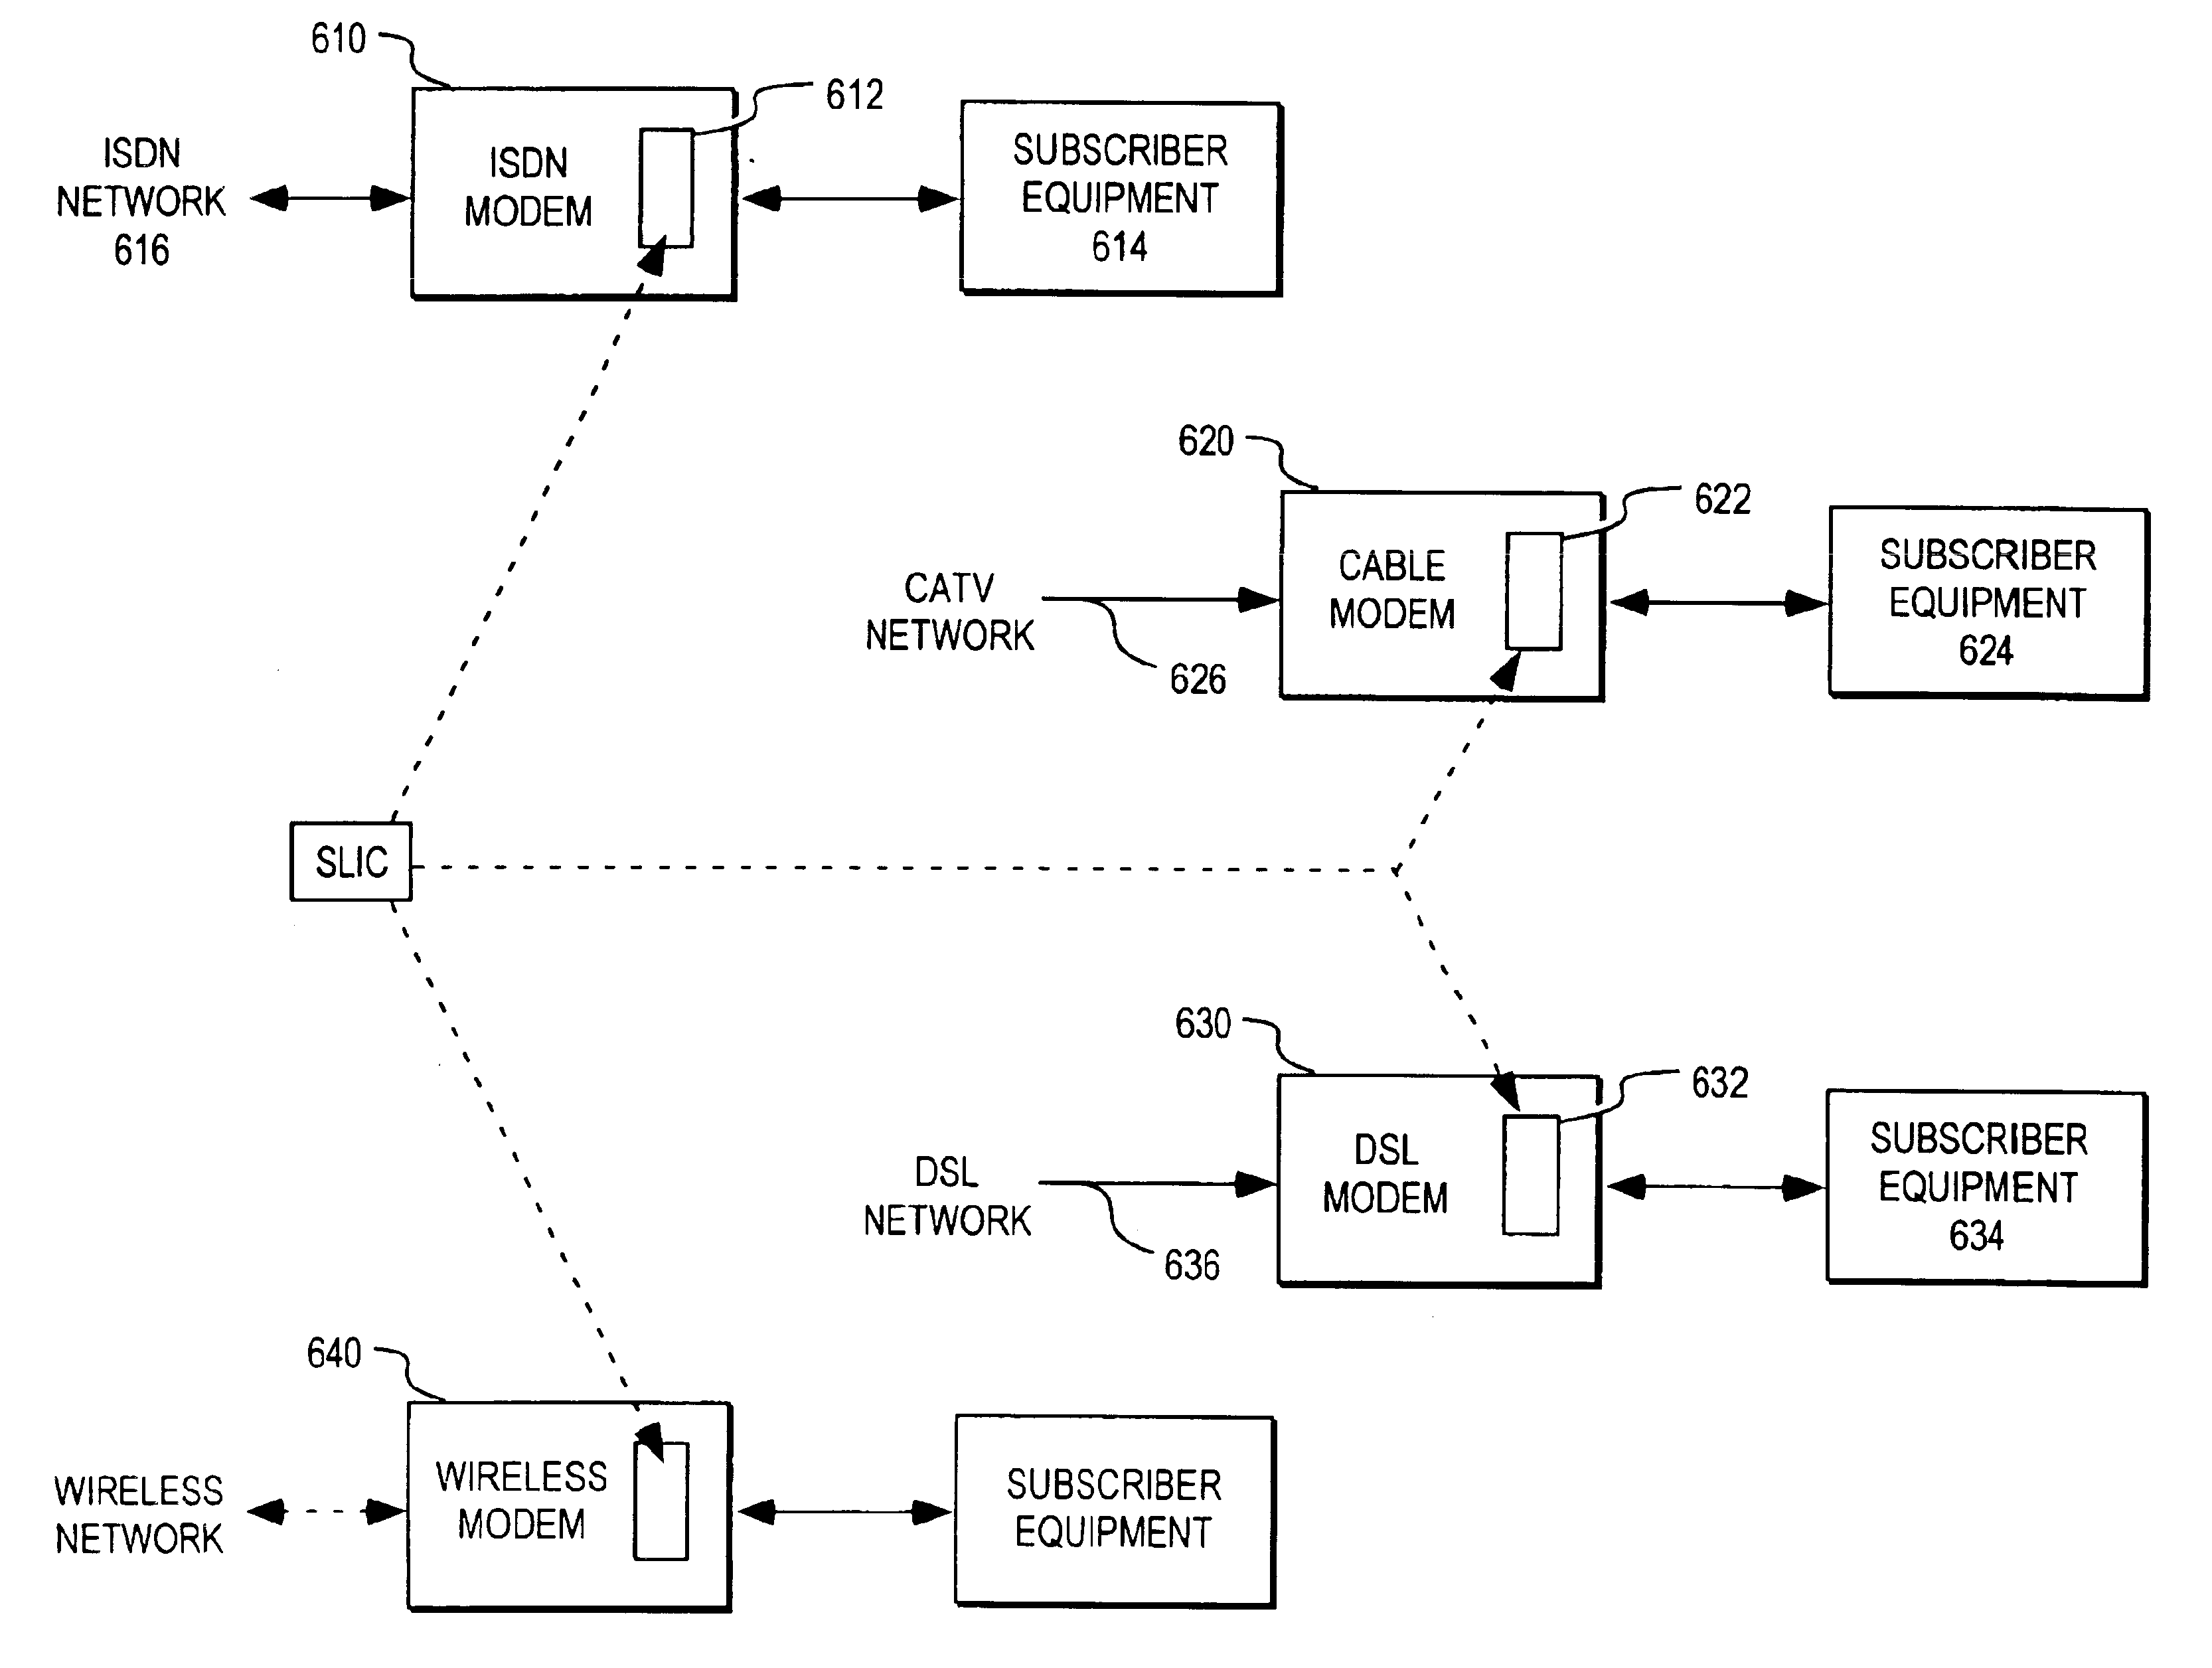 Subscriber line interface circuitry